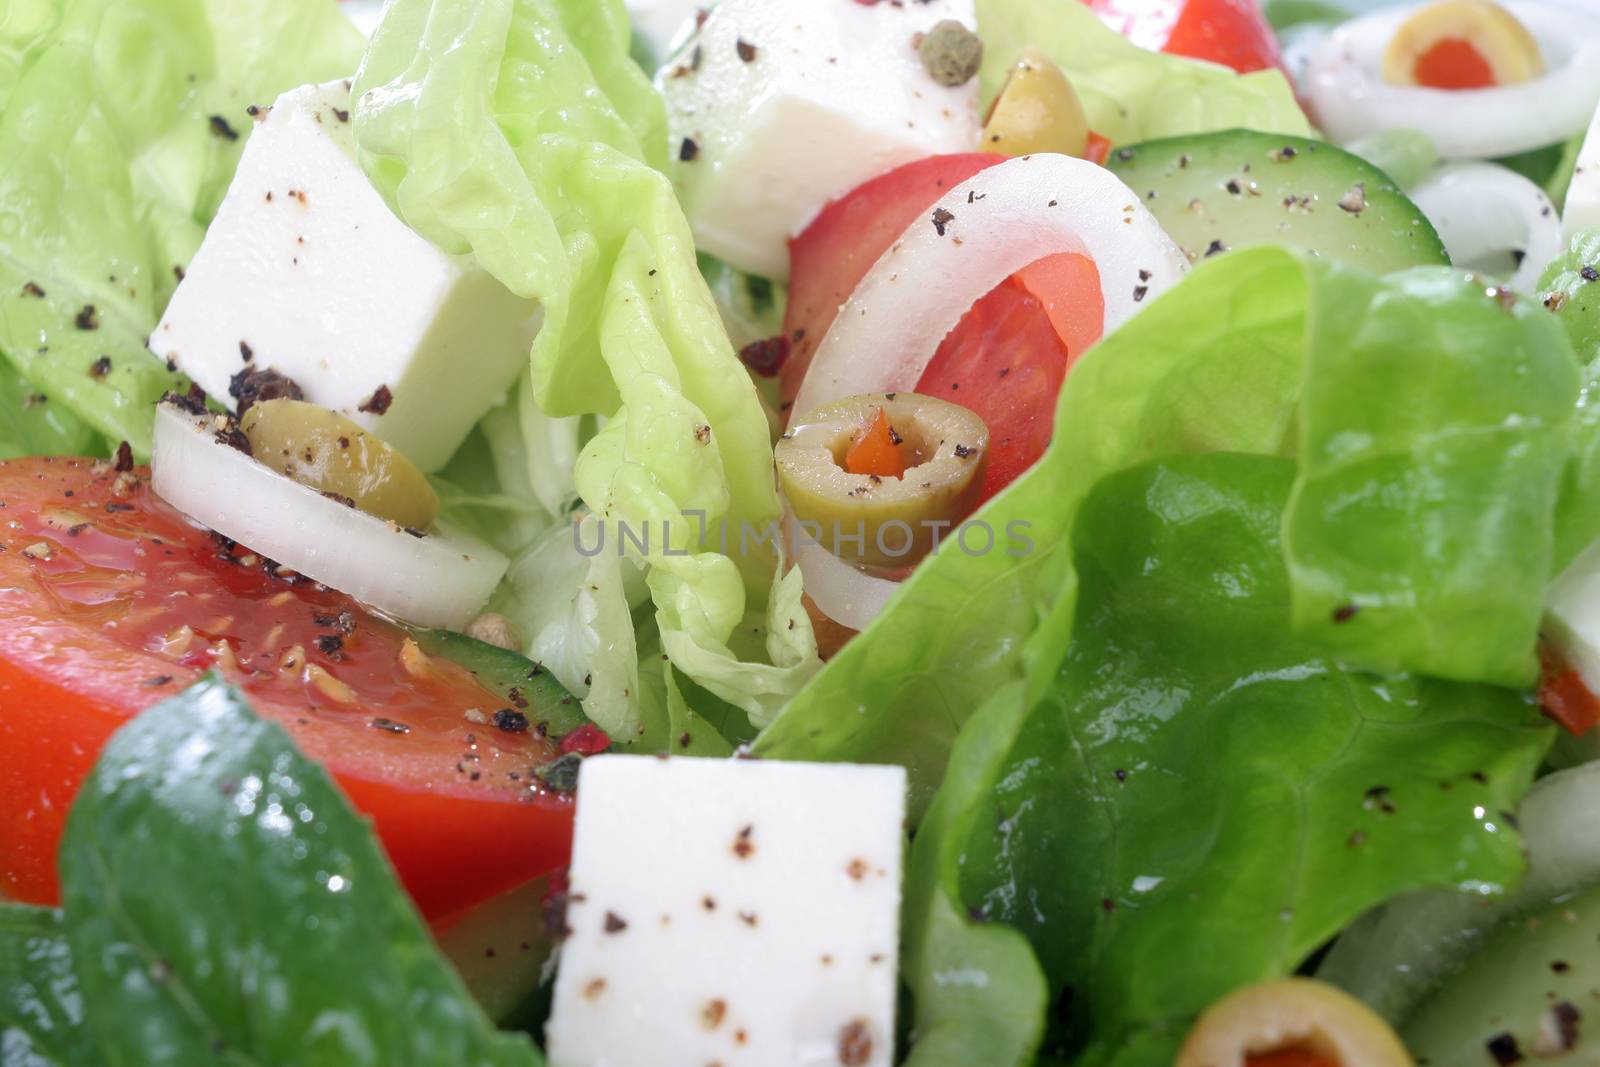 Salad with lettuce, tomato, cucumber, onion, olives clearing sauce.